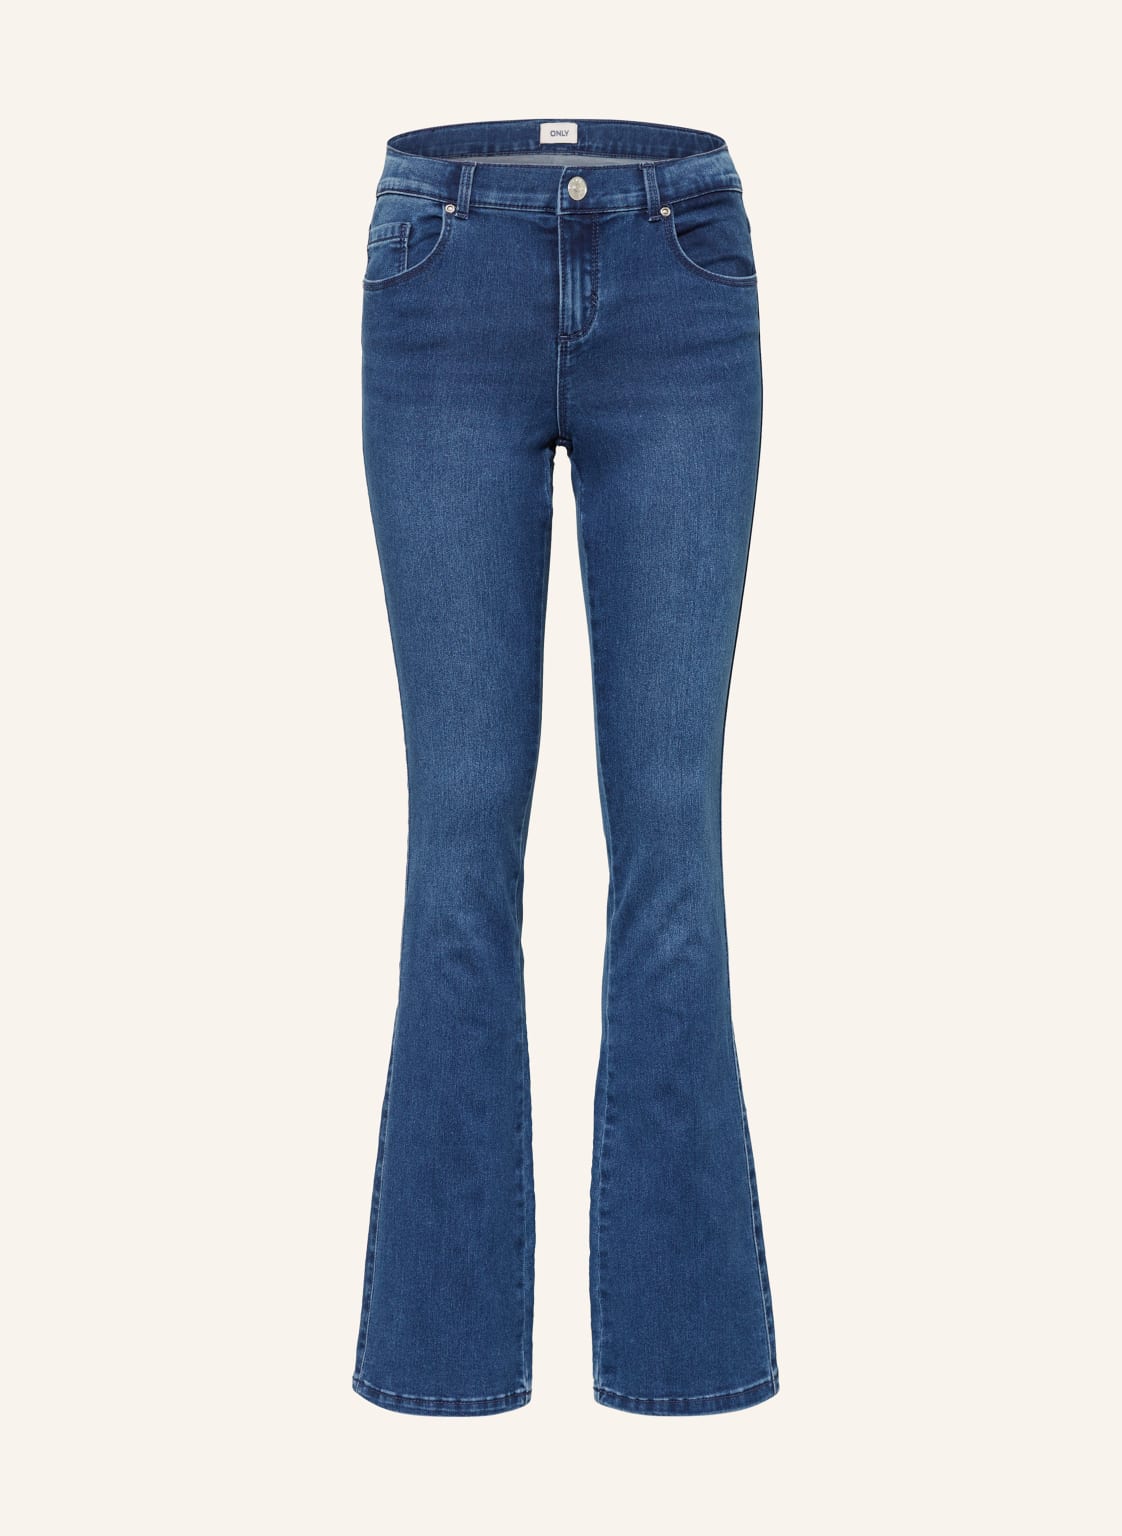 Only Jeans Flared Fit blau von Only